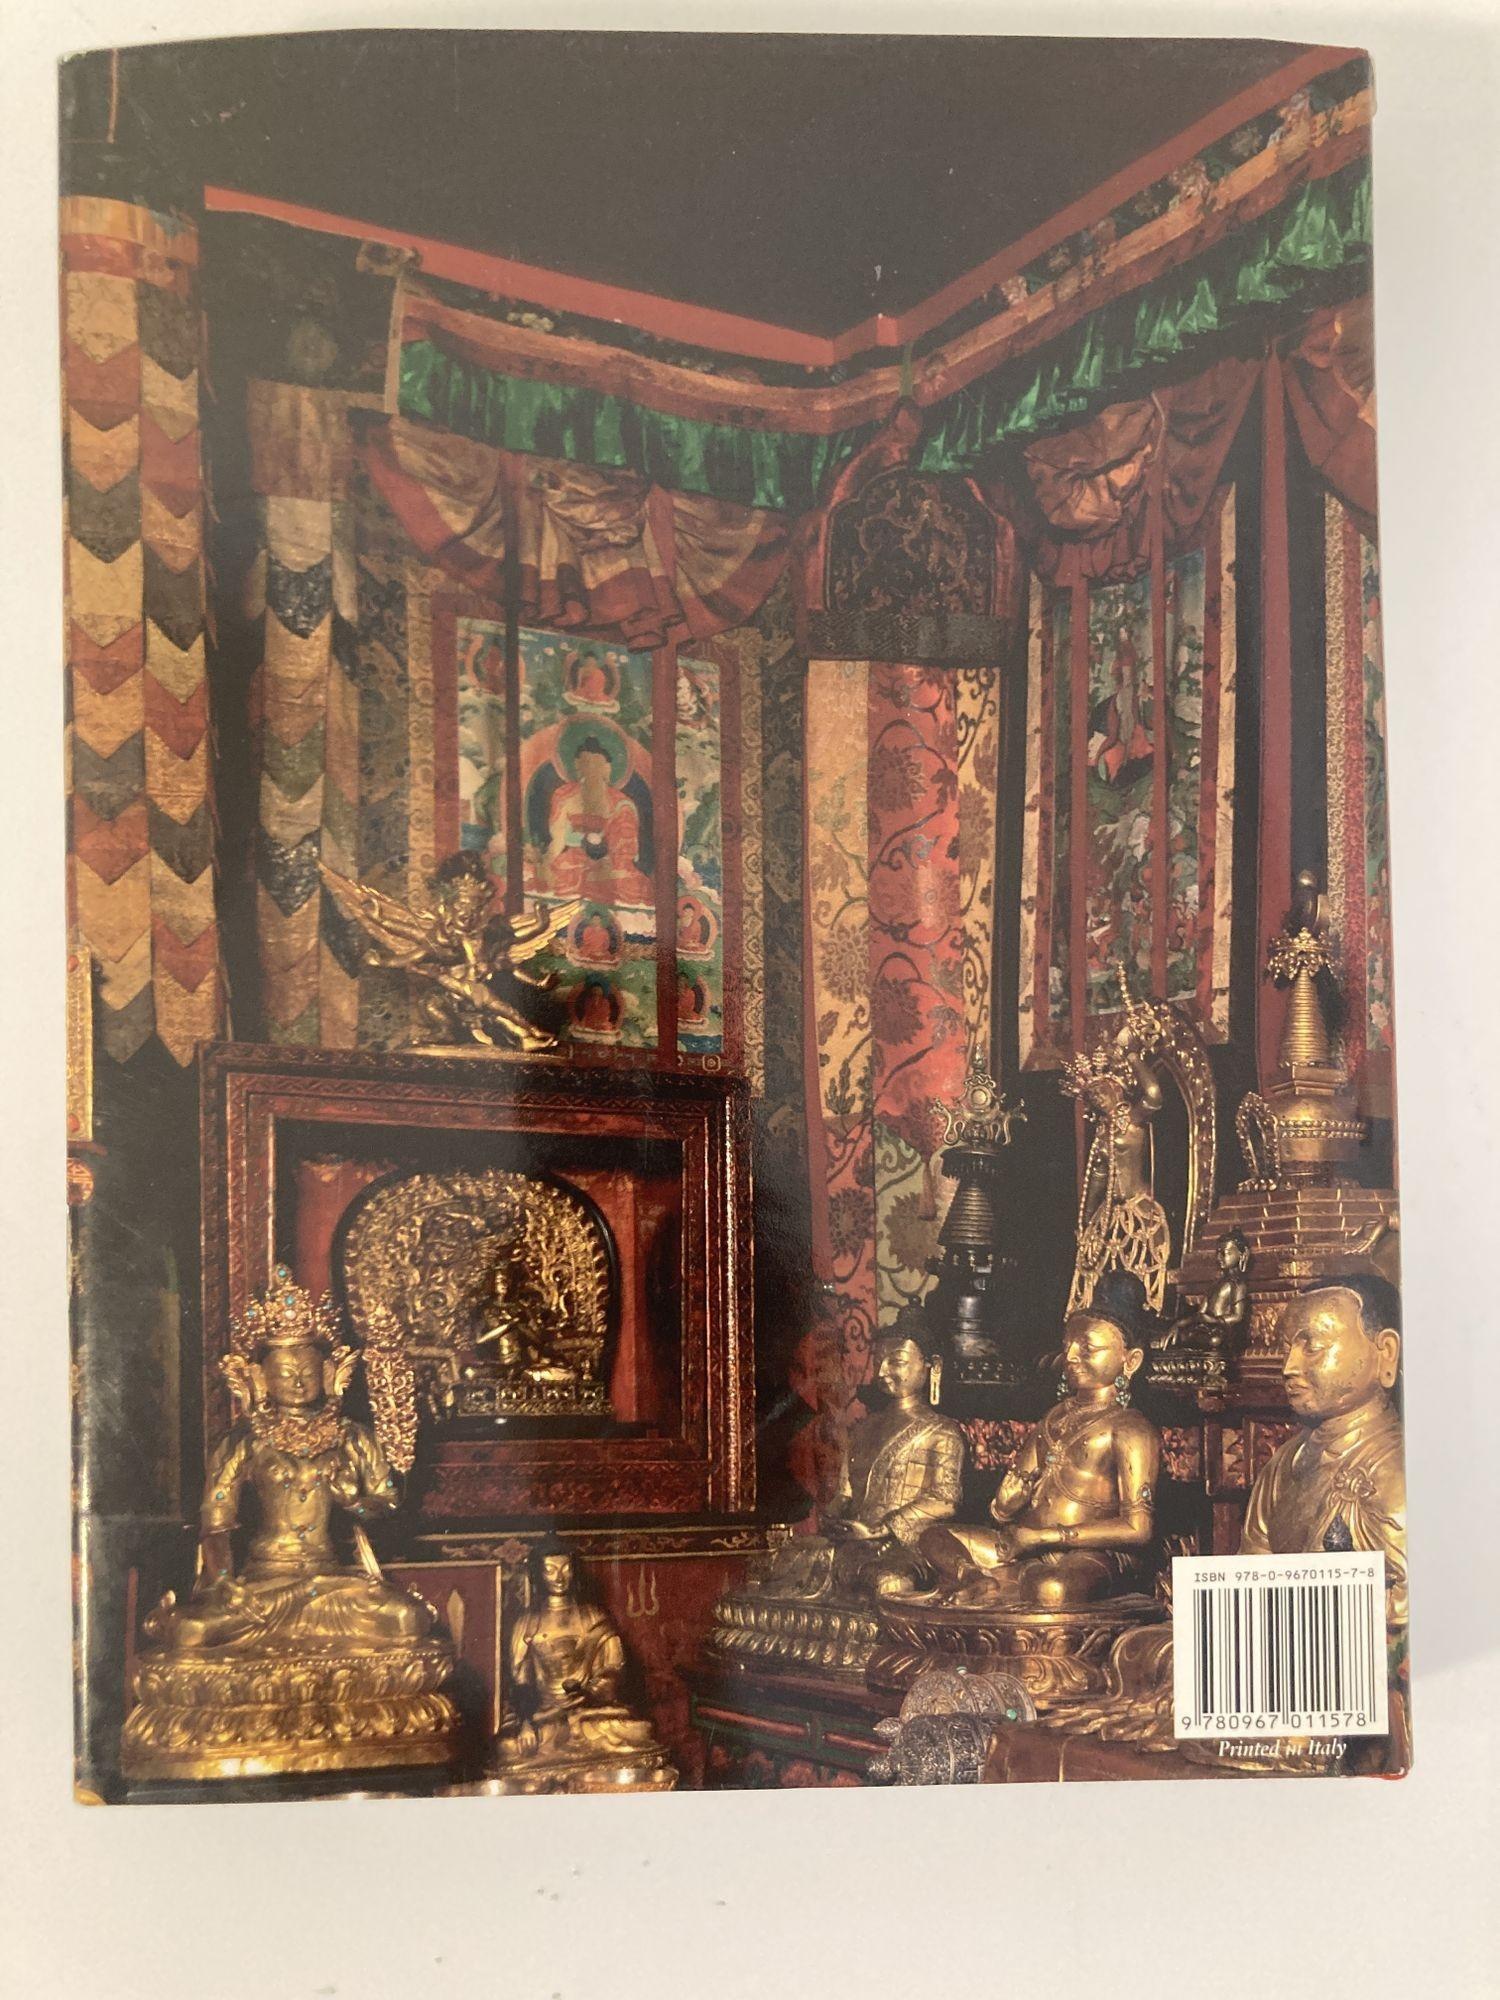 Shrine for Tibet, The Alice S. Kandell Collection Hardcover Book For Sale 8